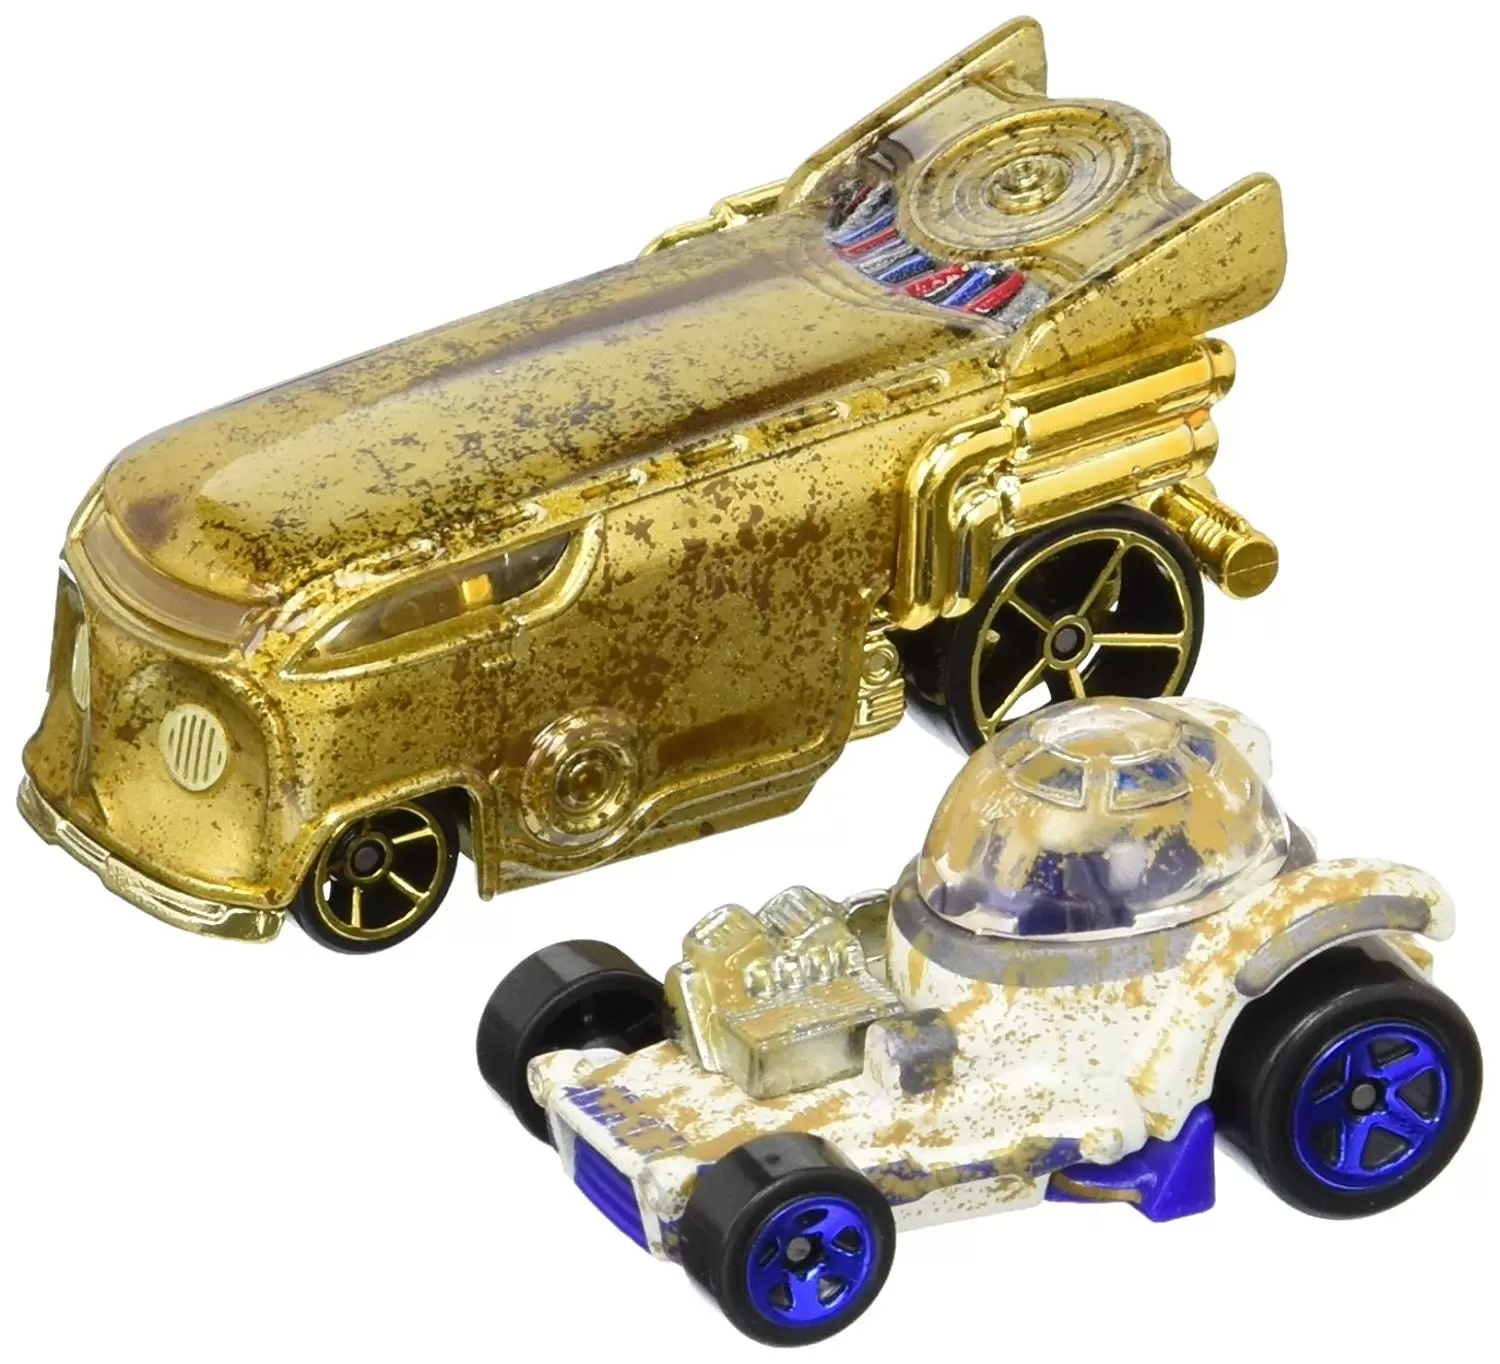 Character Cars Star Wars - R2-D2 & C-3PO